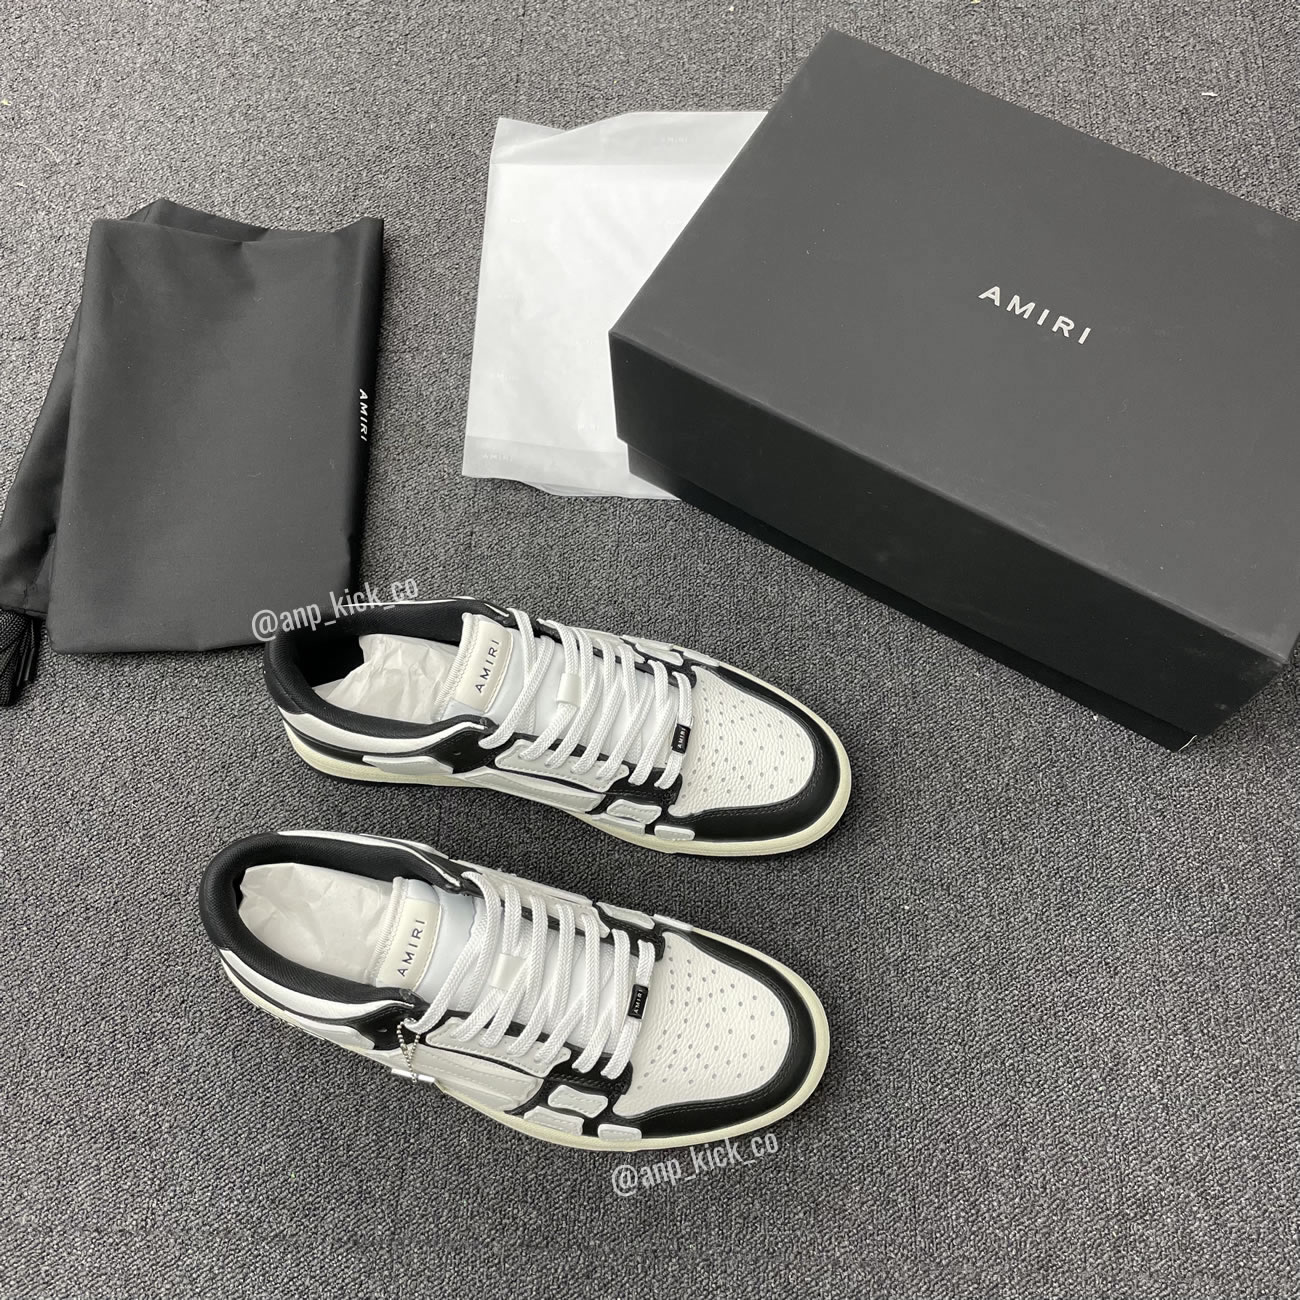 A M I R I Skel Top Low Leather Sneakers Black White Anpkick Mfs003 000 (11) - newkick.org